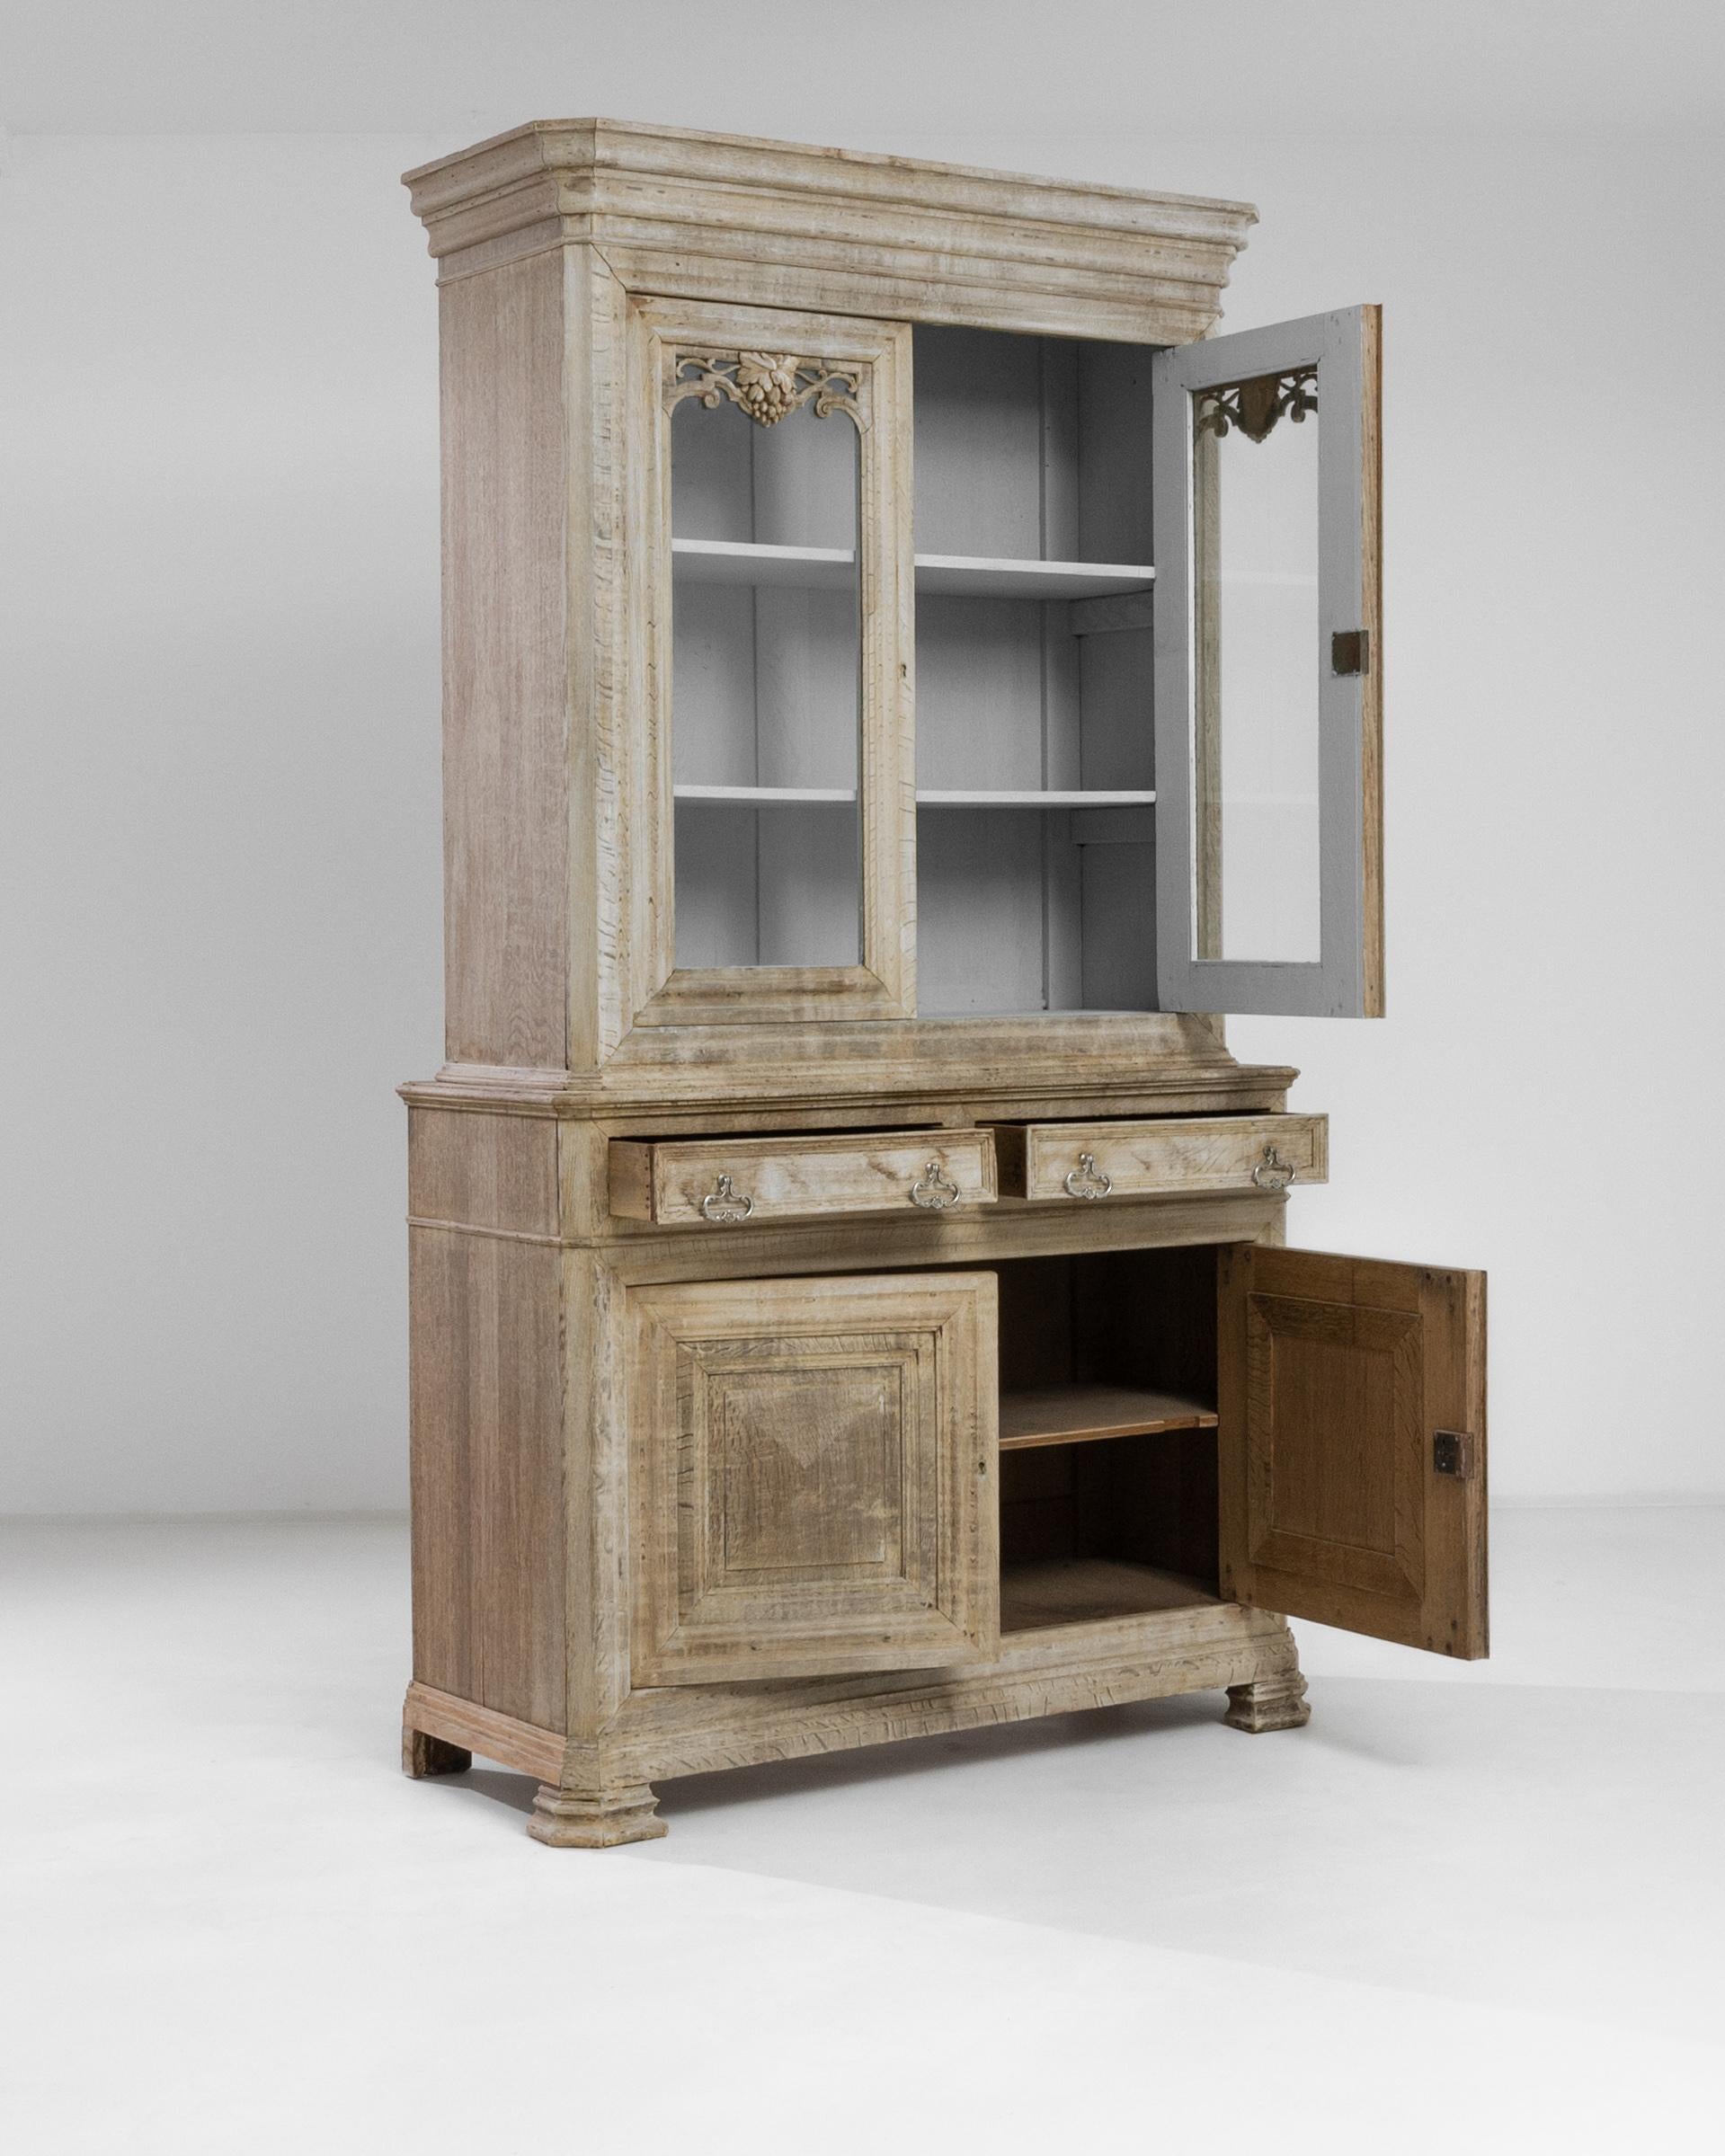 Step back in time with this exquisite 1880s French Bleached Oak Vitrine, a piece that exudes classic elegance and storied charm. The vitrine, crafted during the late 19th century, stands as a testament to timeless French craftsmanship. Its